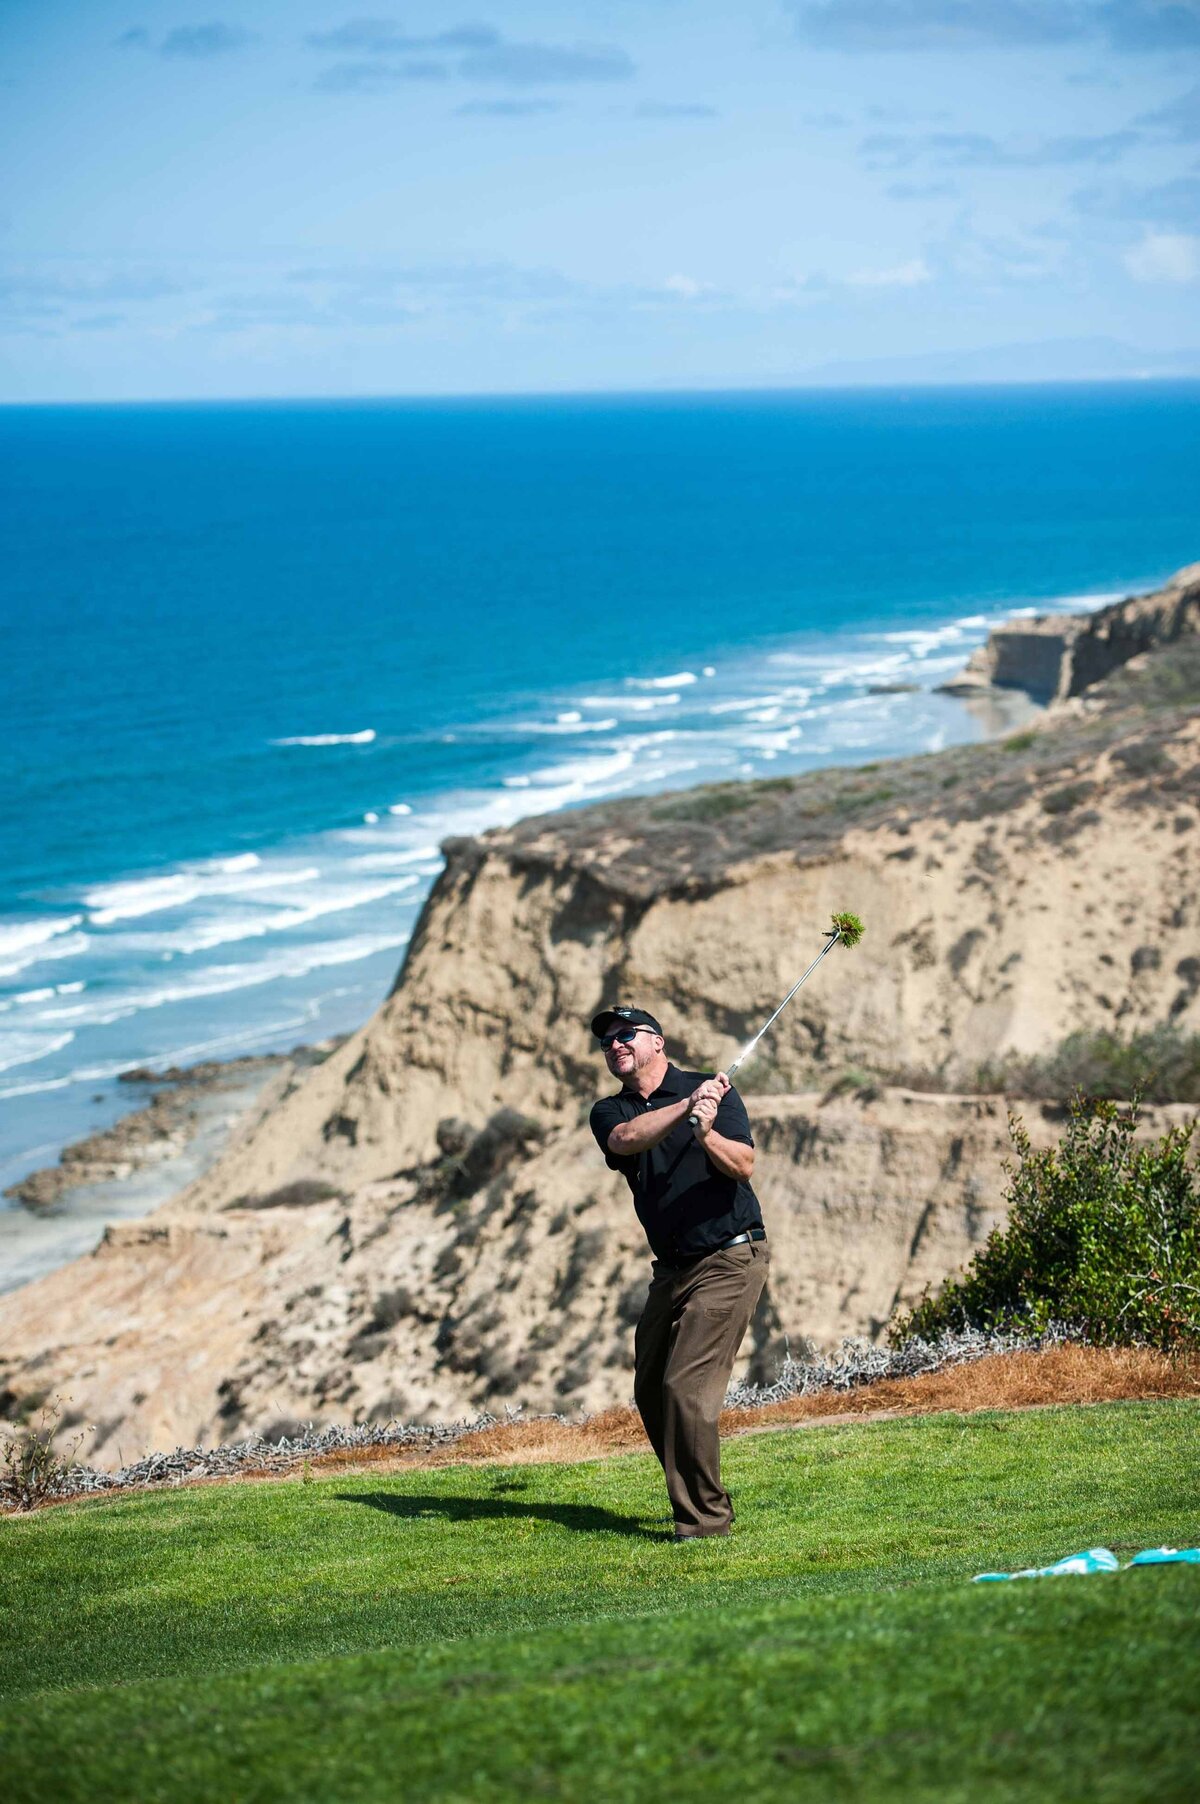 A man swings his club at Torrey Pines Golf Course in San Diego CA